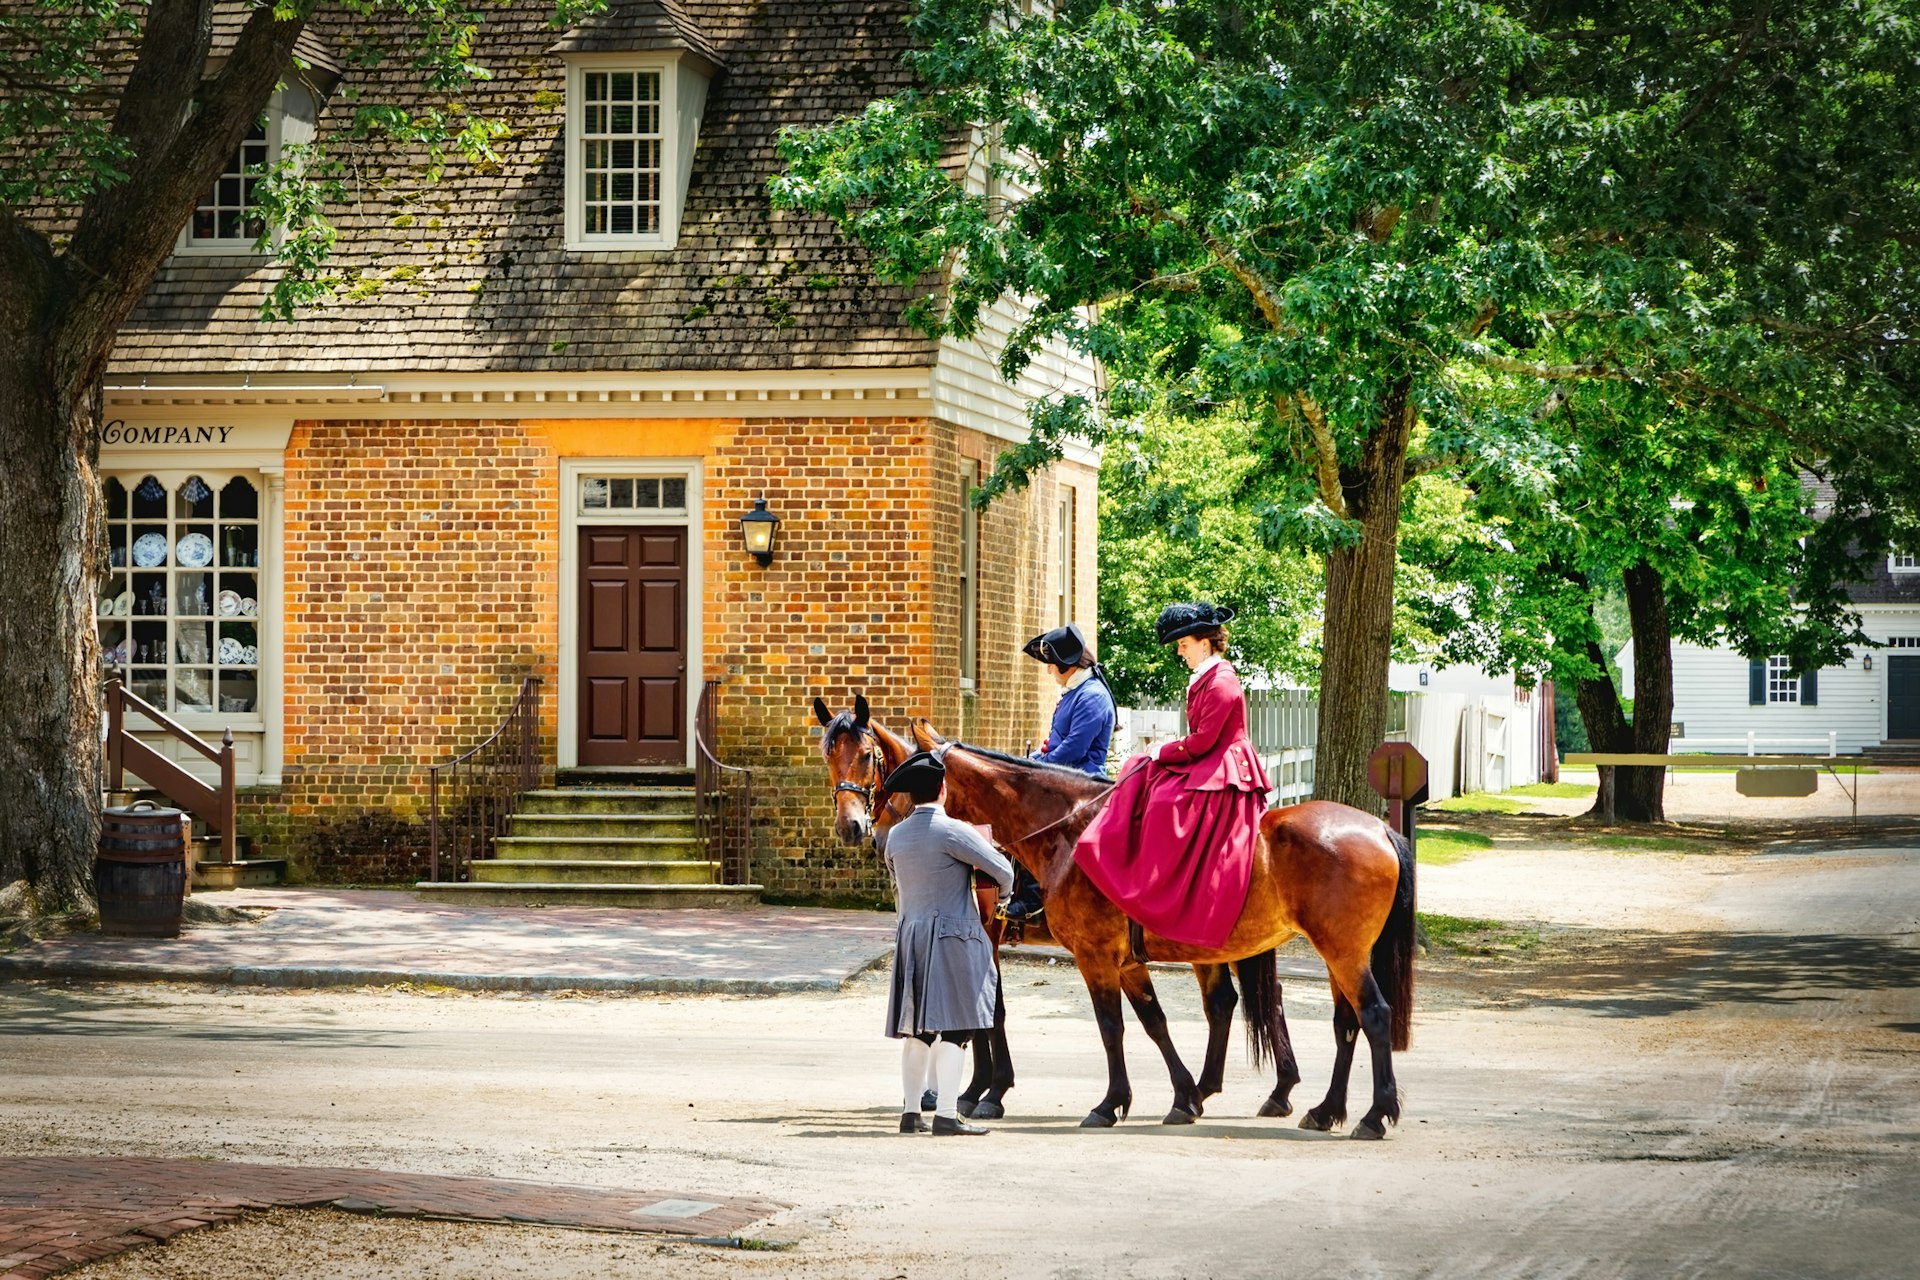 Three people in colonial dress, two on horseback, in a preserved historic town